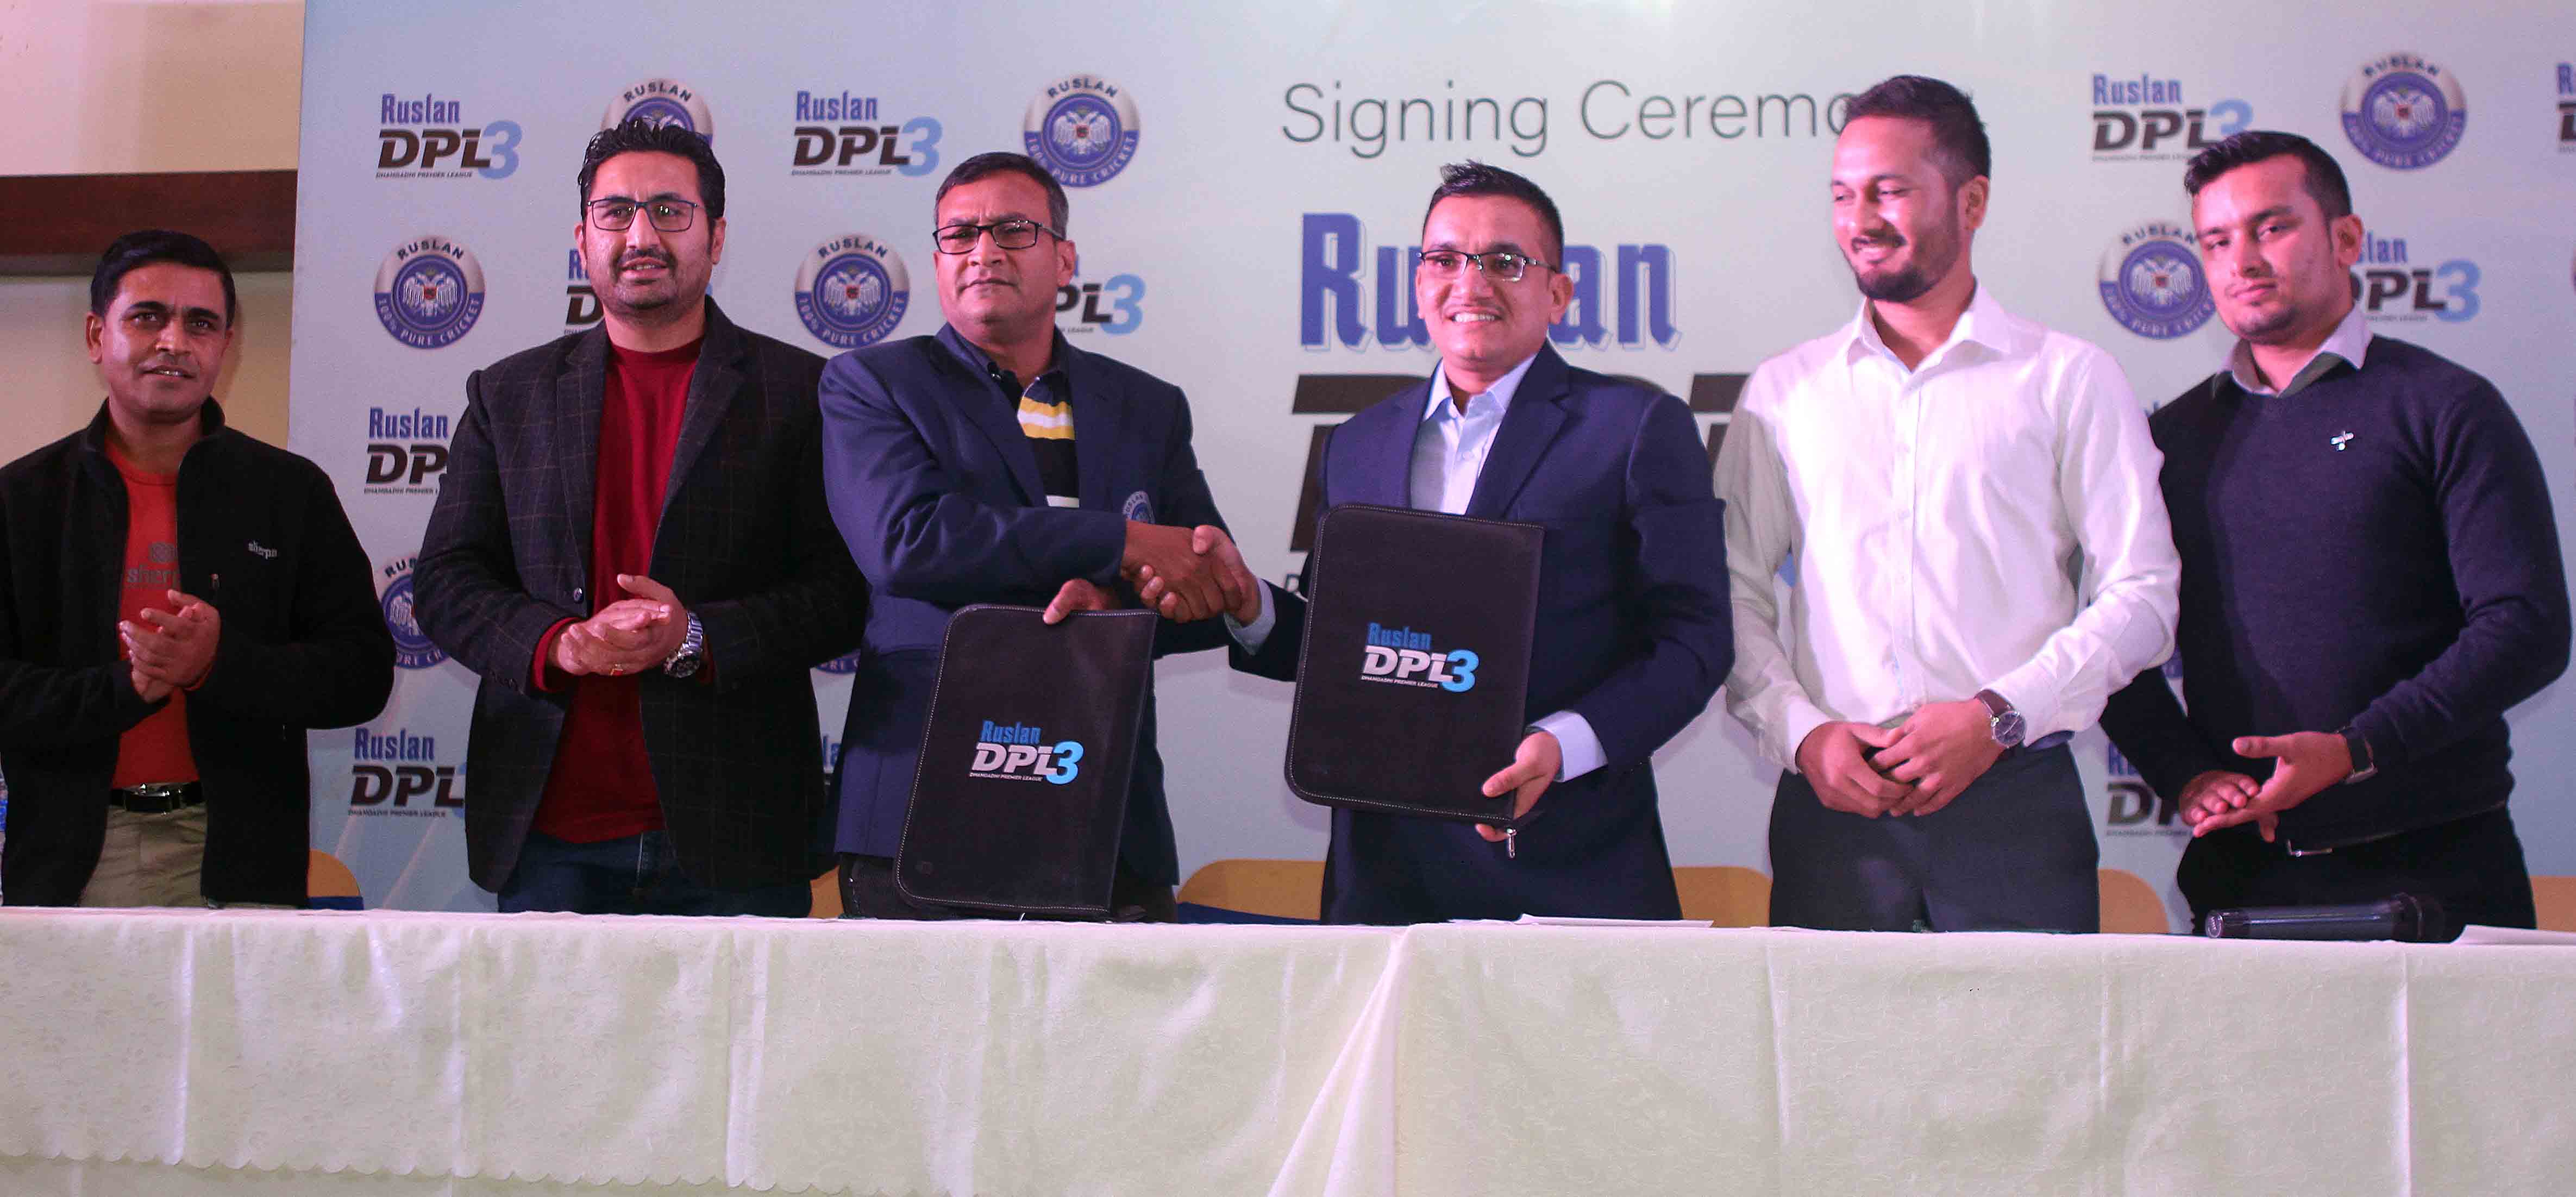 Subash Bahadur Shahi (third from right) President of Dhangadhi Cricket Academy exchanges MoU with Satish Karna (third from left) CFO of Bijay Distillery Pvt Limited during signing ceremony of Dhanagdhi Premier League 3 in Kathmandu on Friday, November 16, 2018. Photo: THT